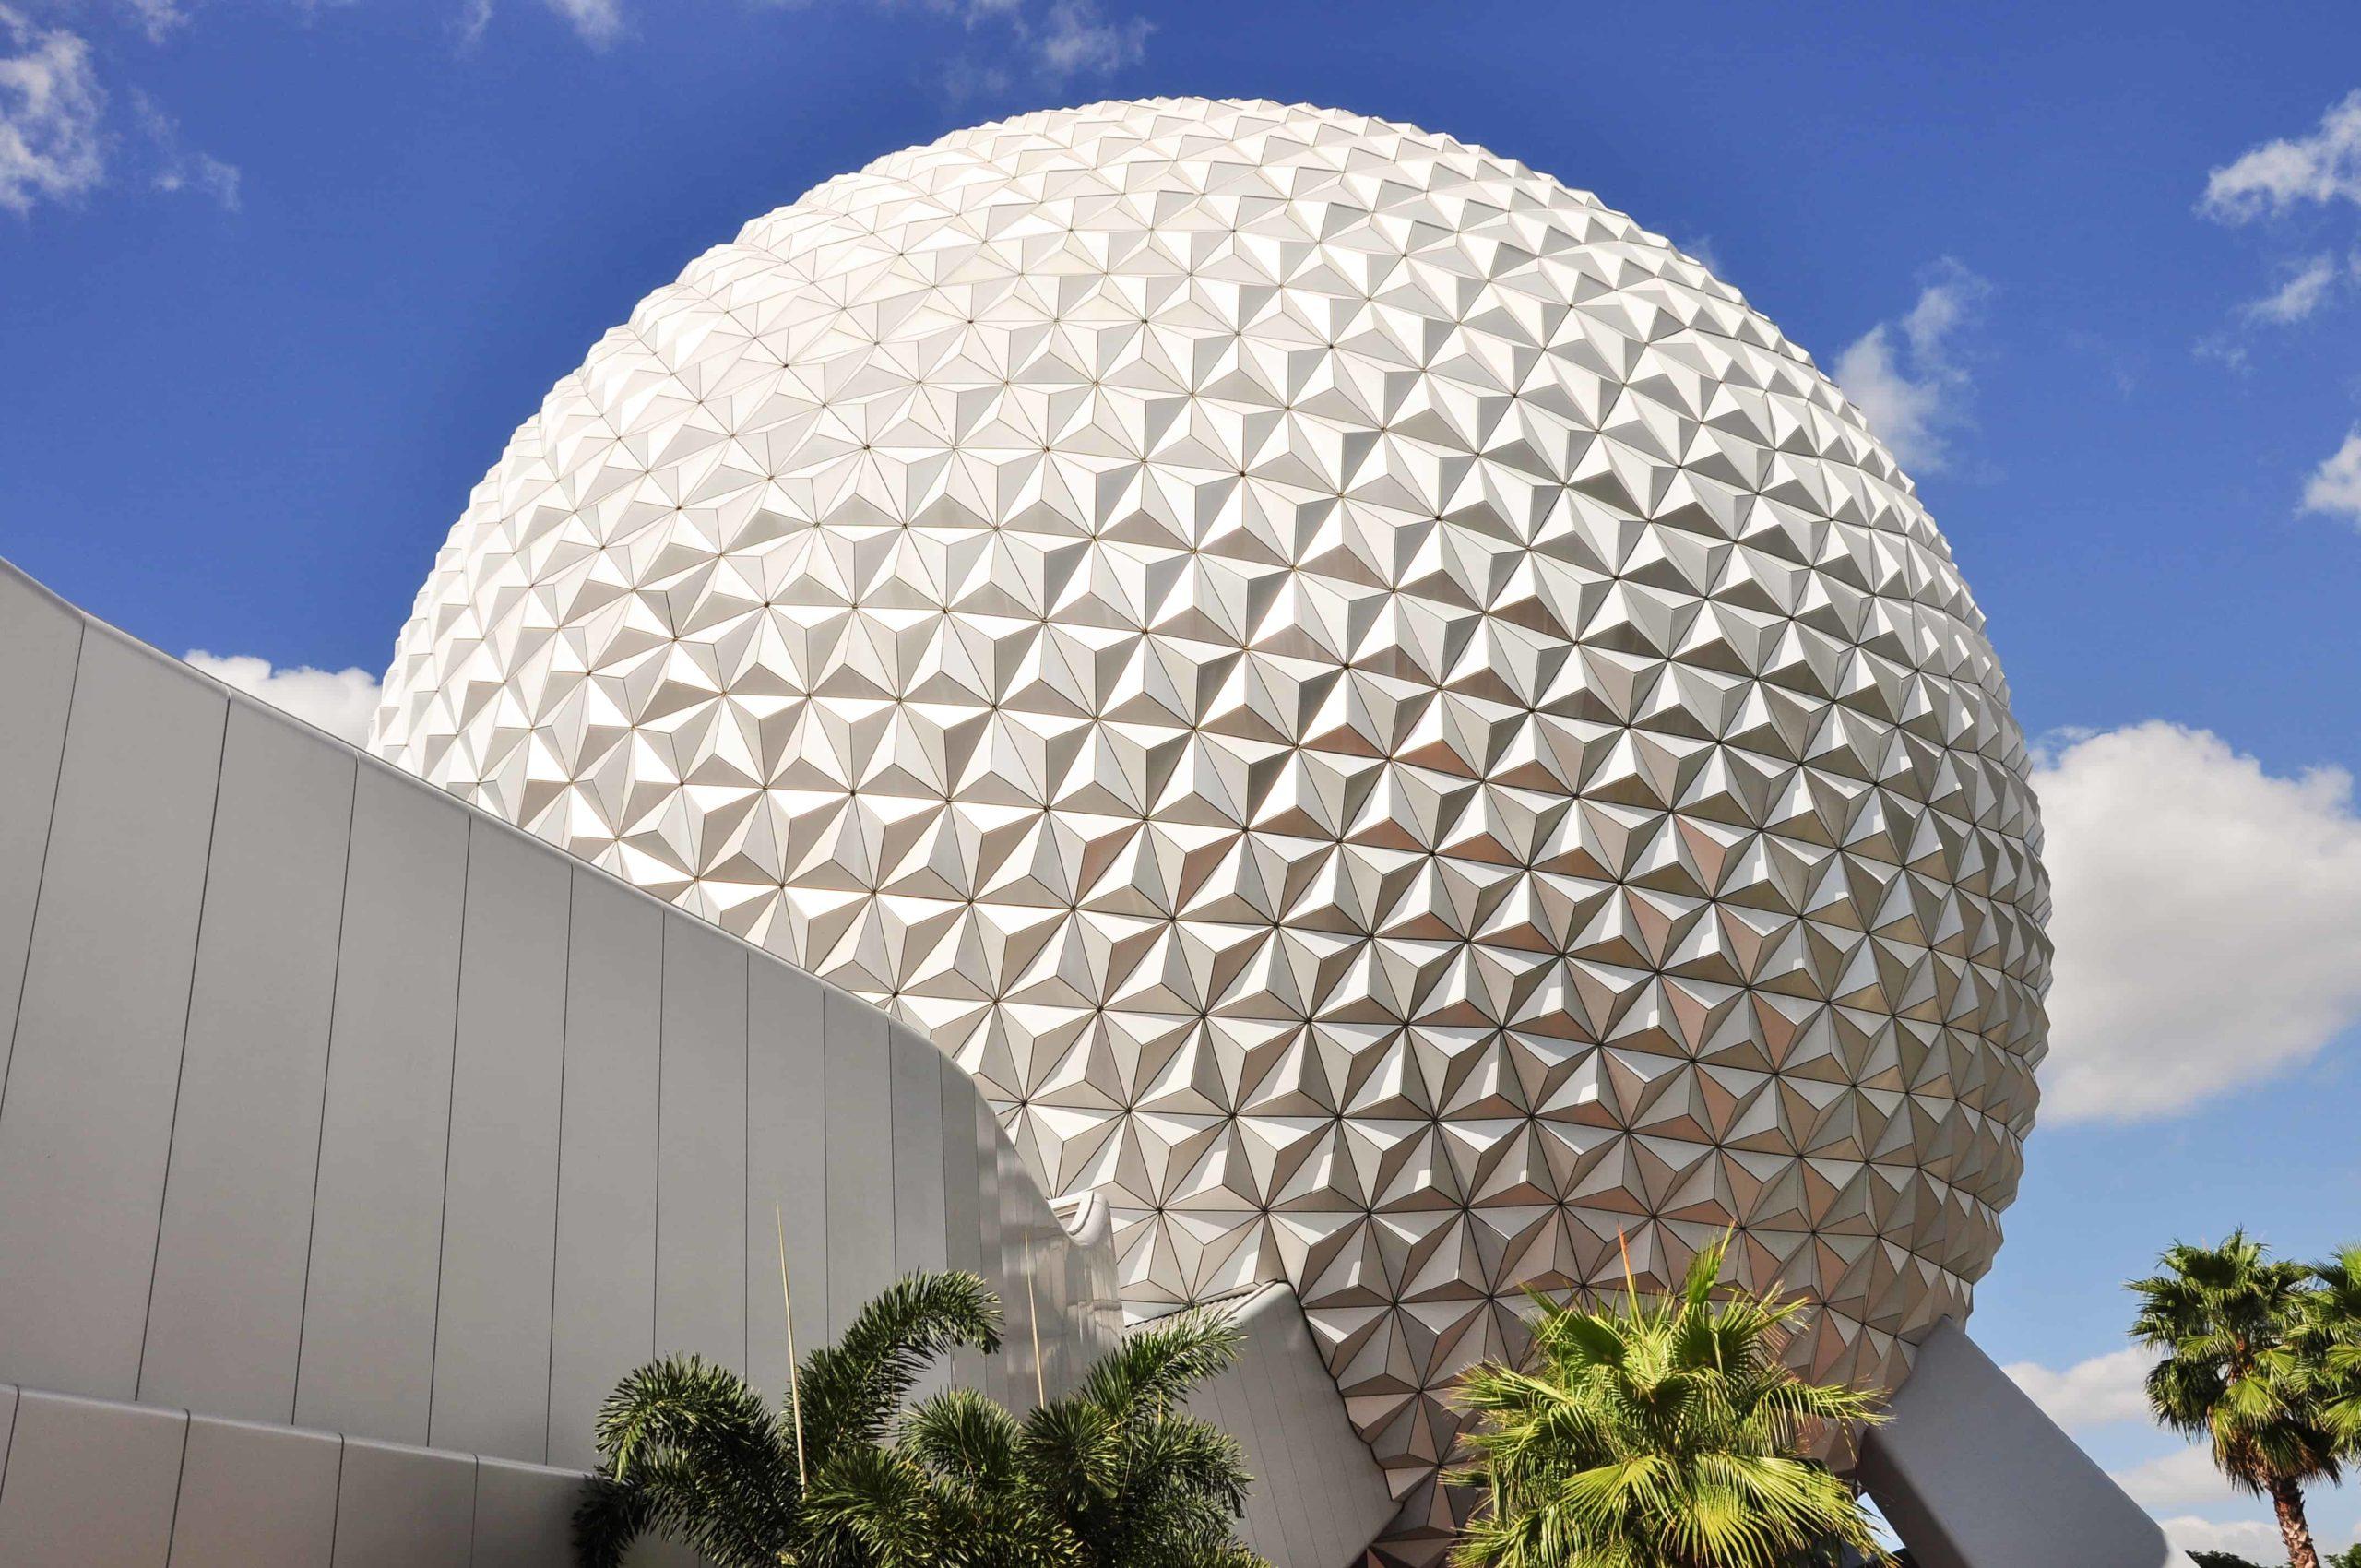 What Does Epcot Stand For? - EverythingMouse Guide To Disney